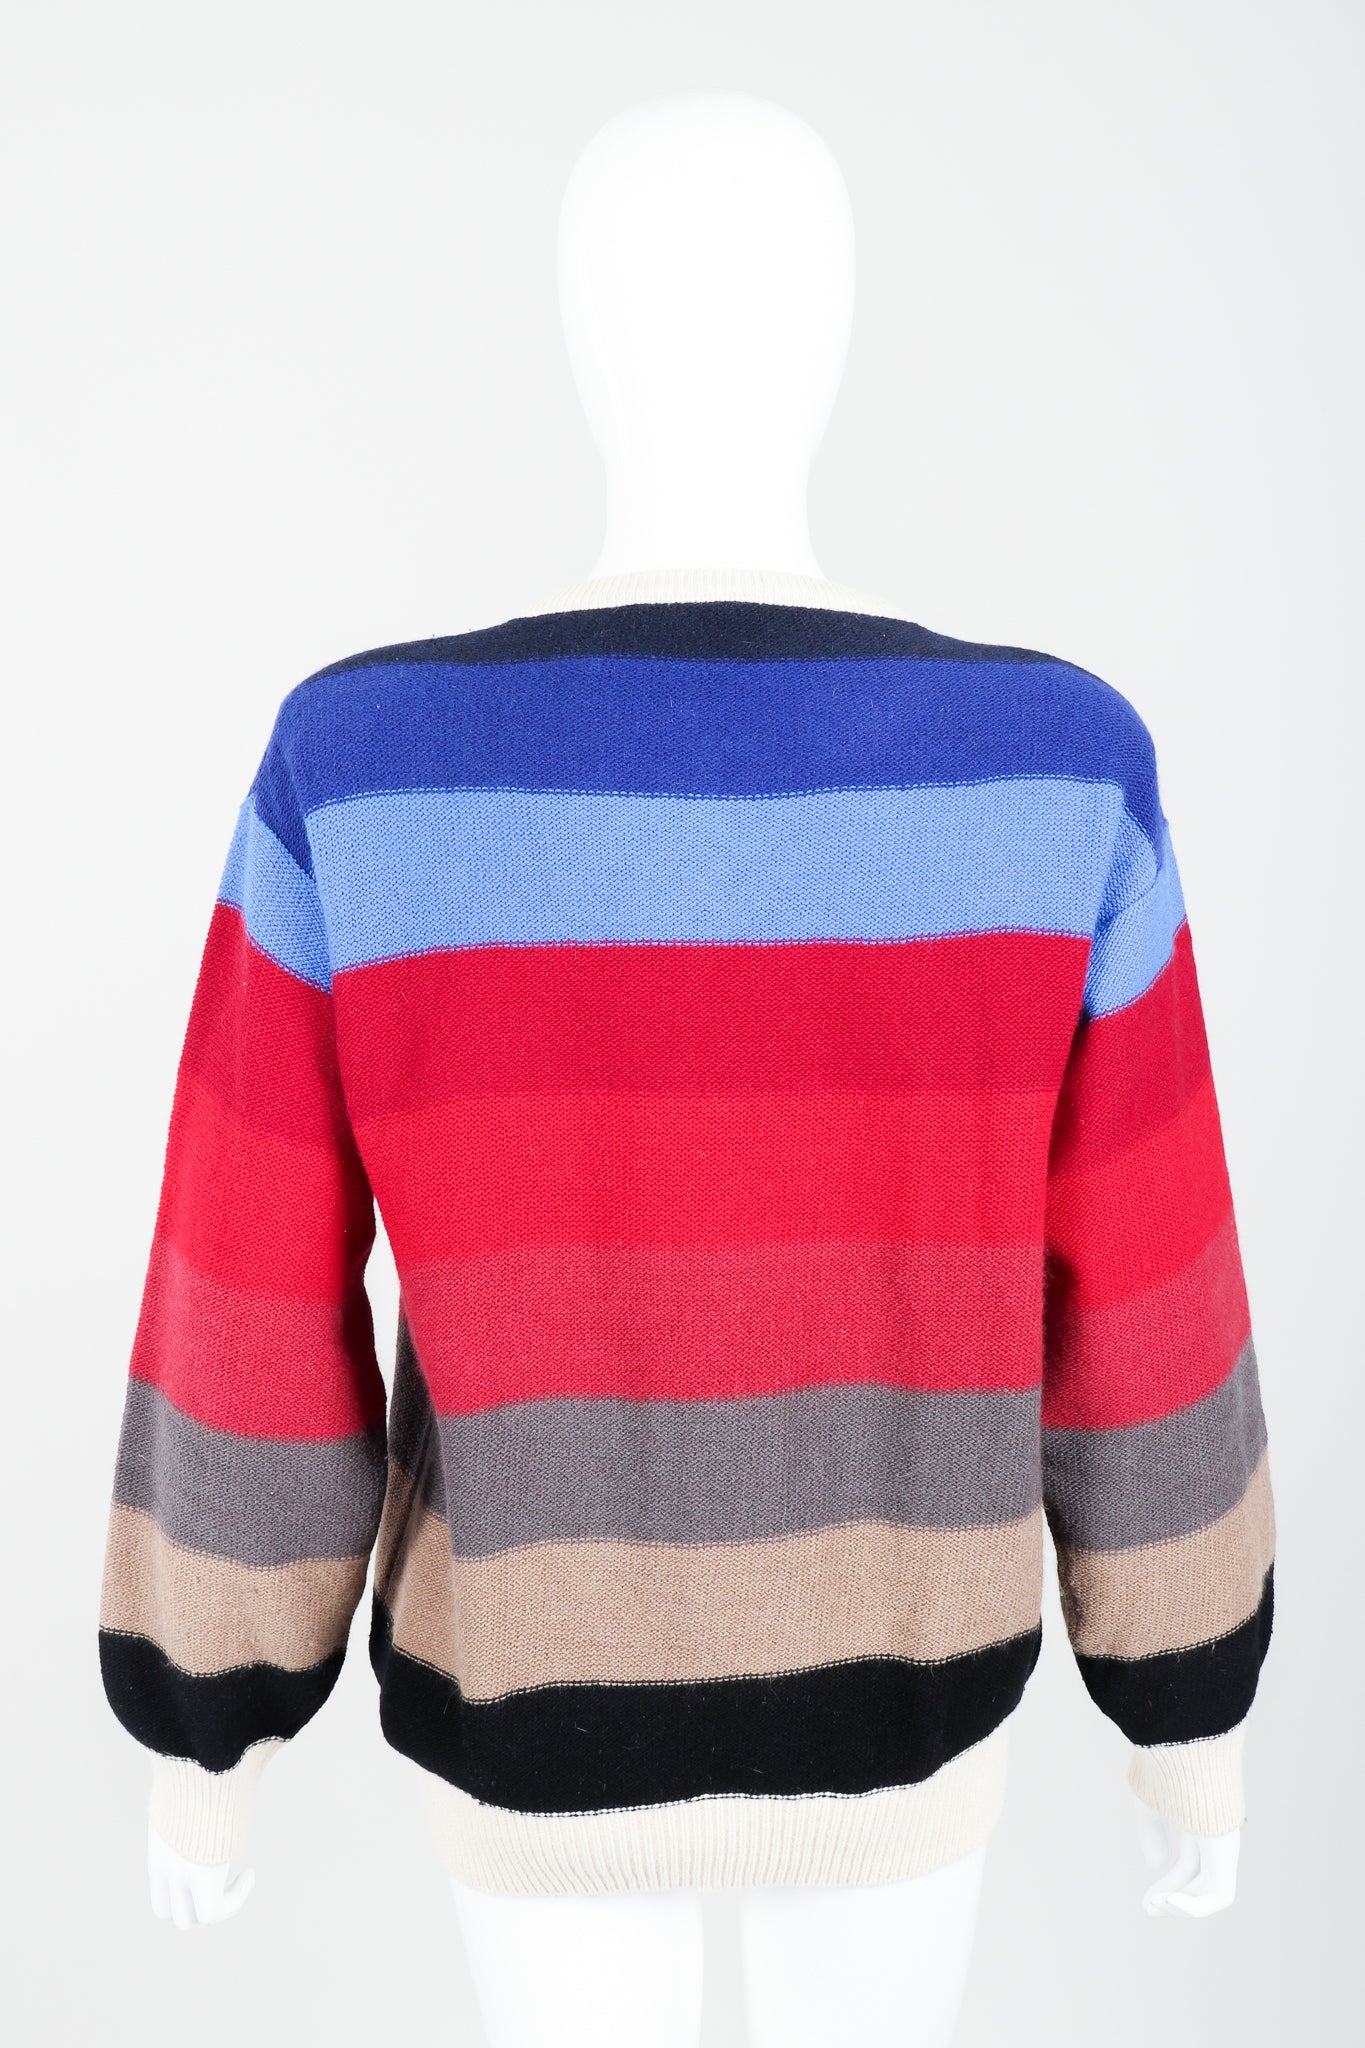 Vintage Sonia Rykiel Ombré Striped Knit Sweater on Mannequin back at Recess